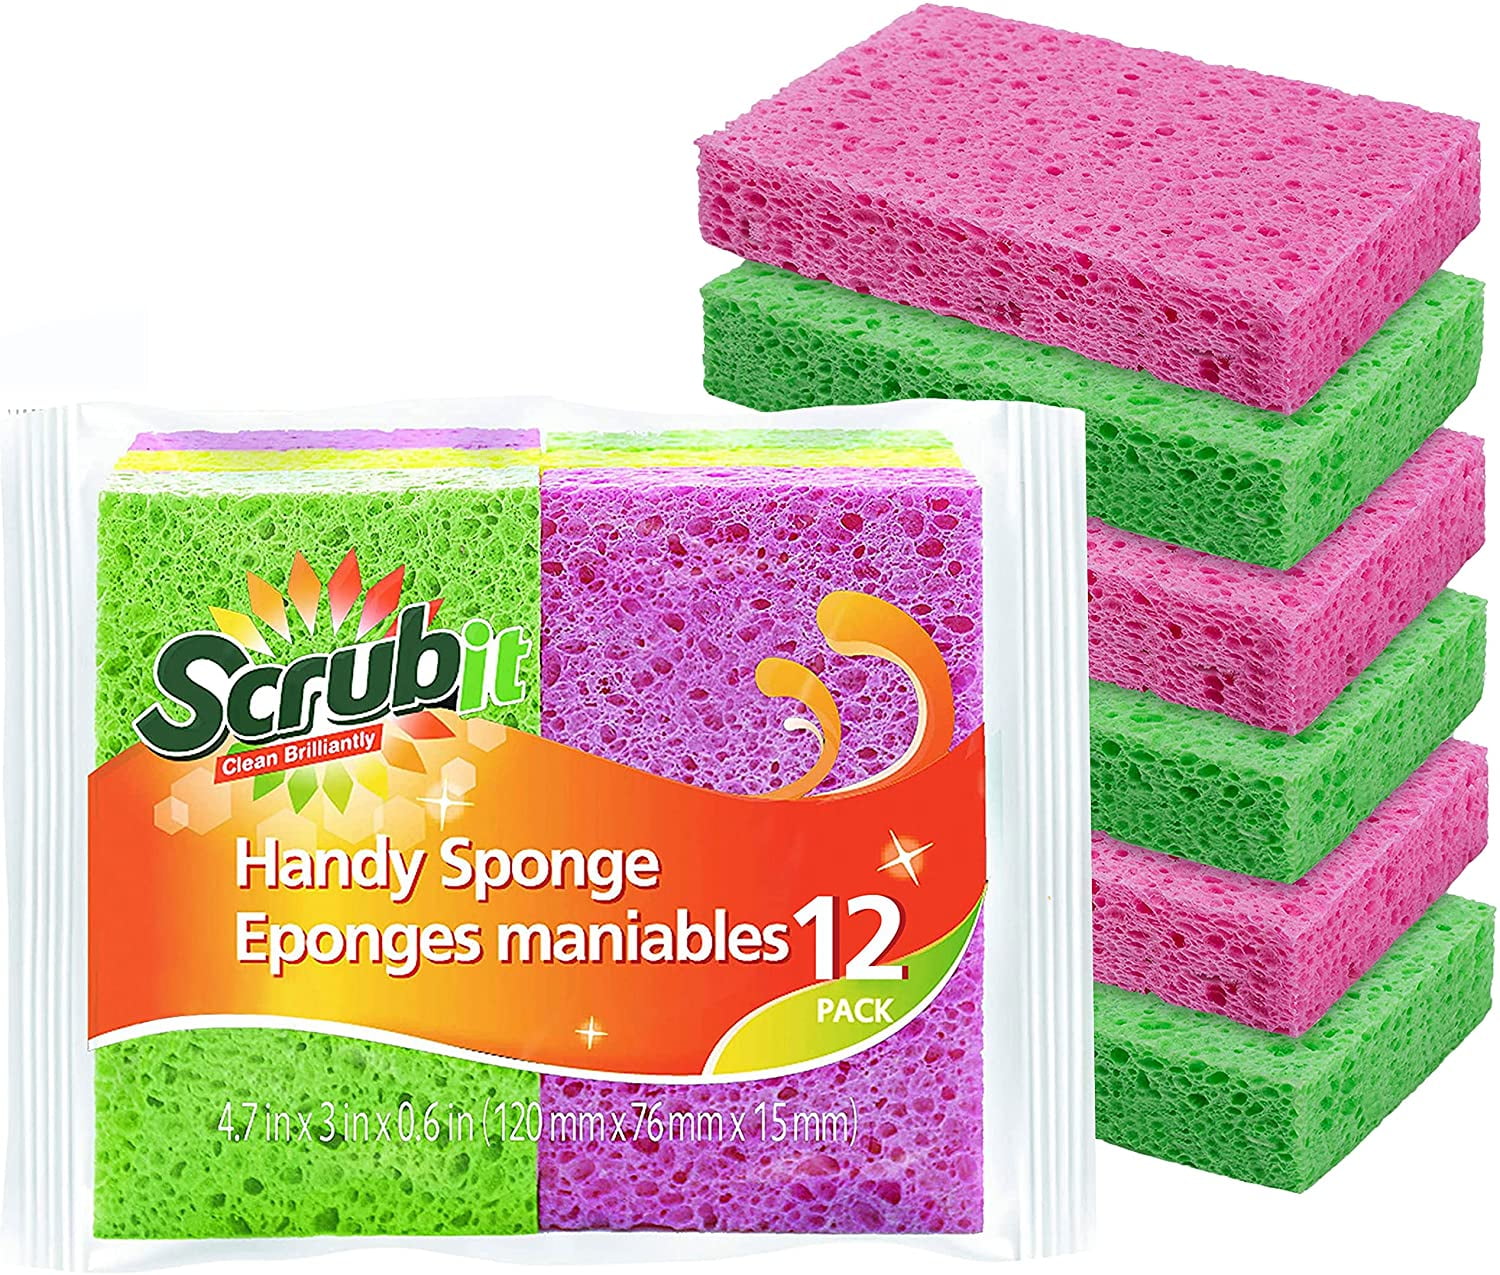 ocelo Handy Sponge 4-Count 4.7-Inches x 3-Inches x 3/5-Inches 